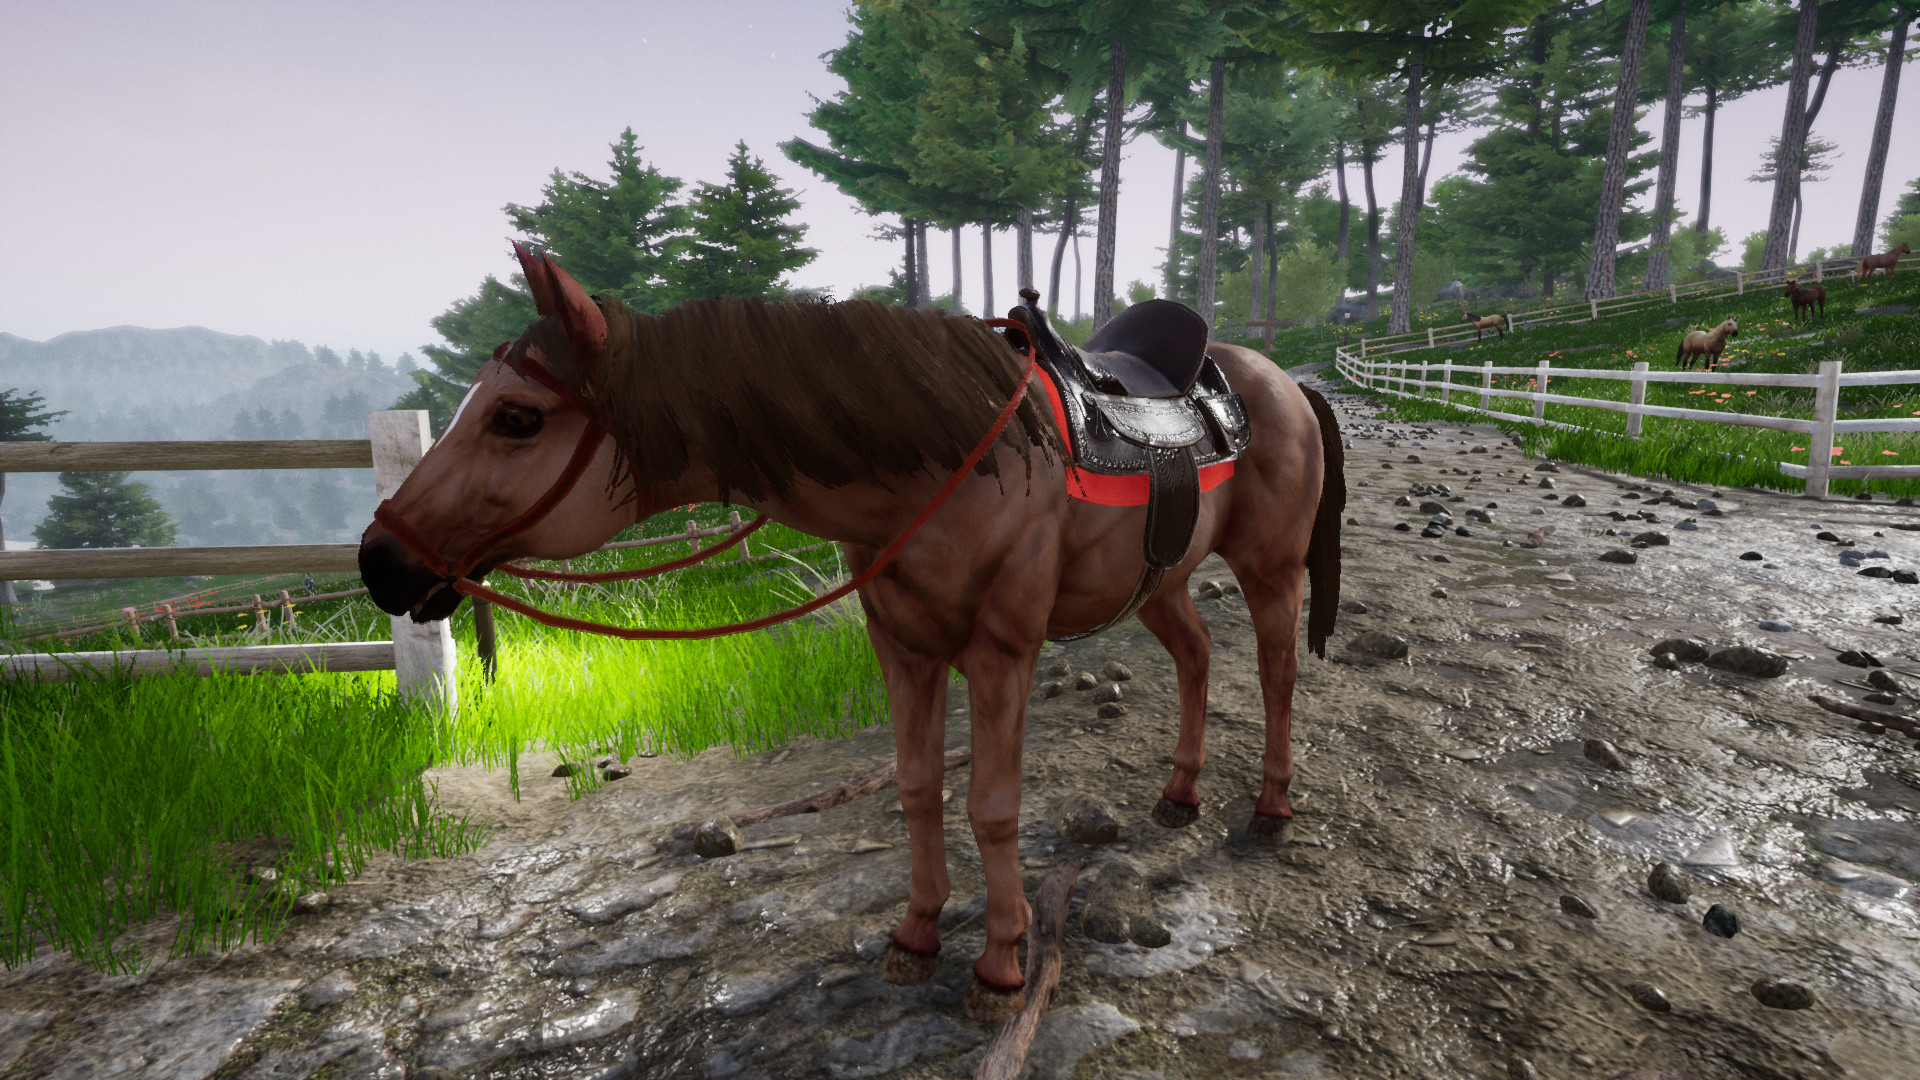 Horse Riding Deluxe 2 On Steam